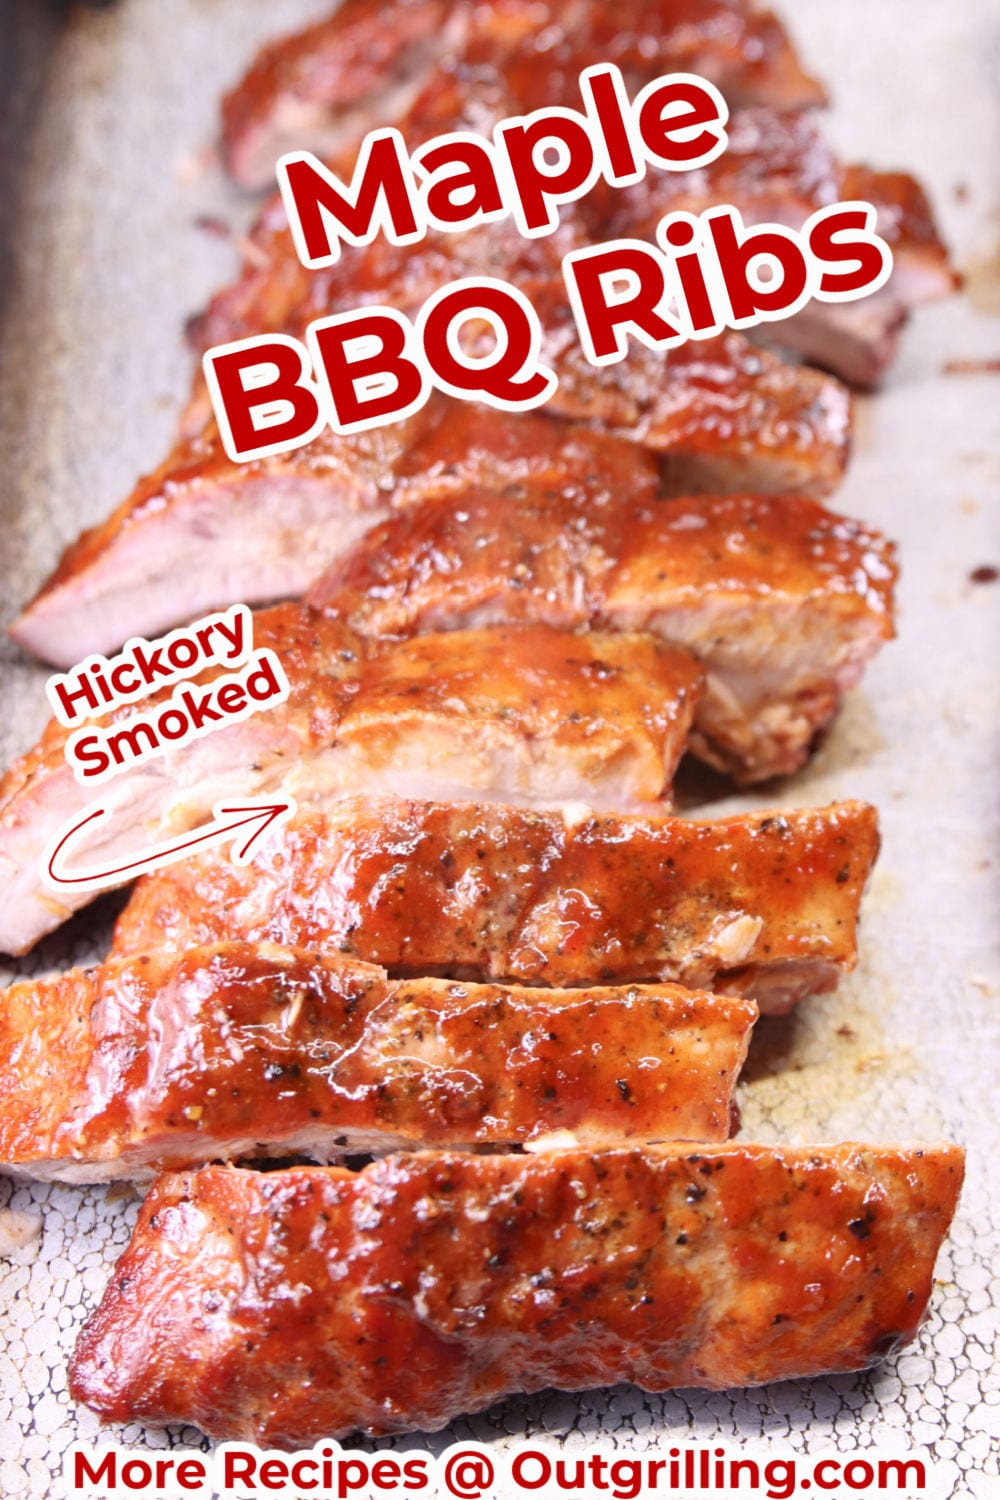 Sliced Maple BBQ Ribs on a platter - text overlay of title